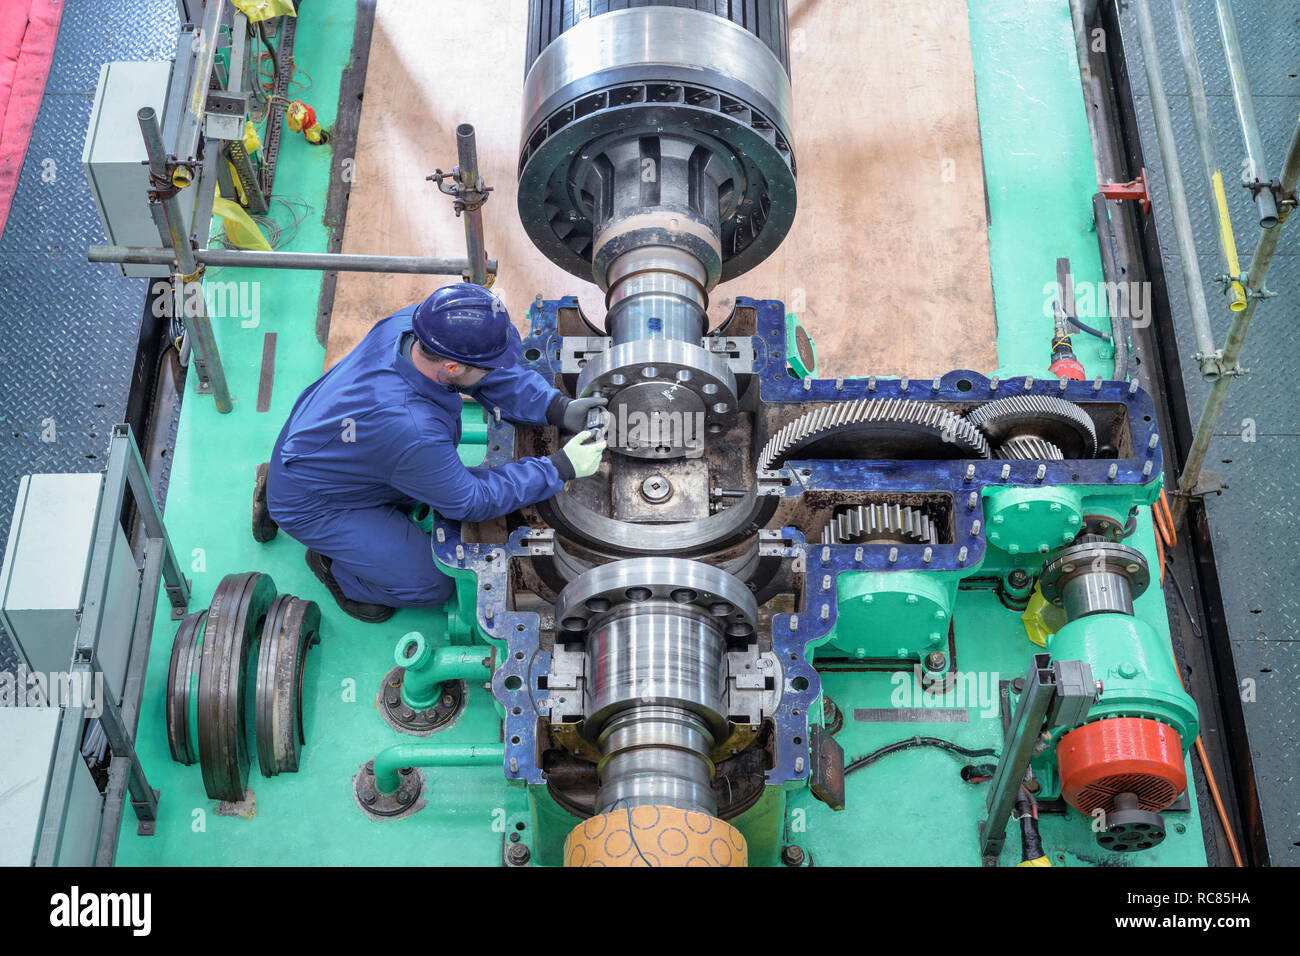 Overhead view of engineer inspecting gears on generator in turbine hall of nuclear power station during outage Stock Photo